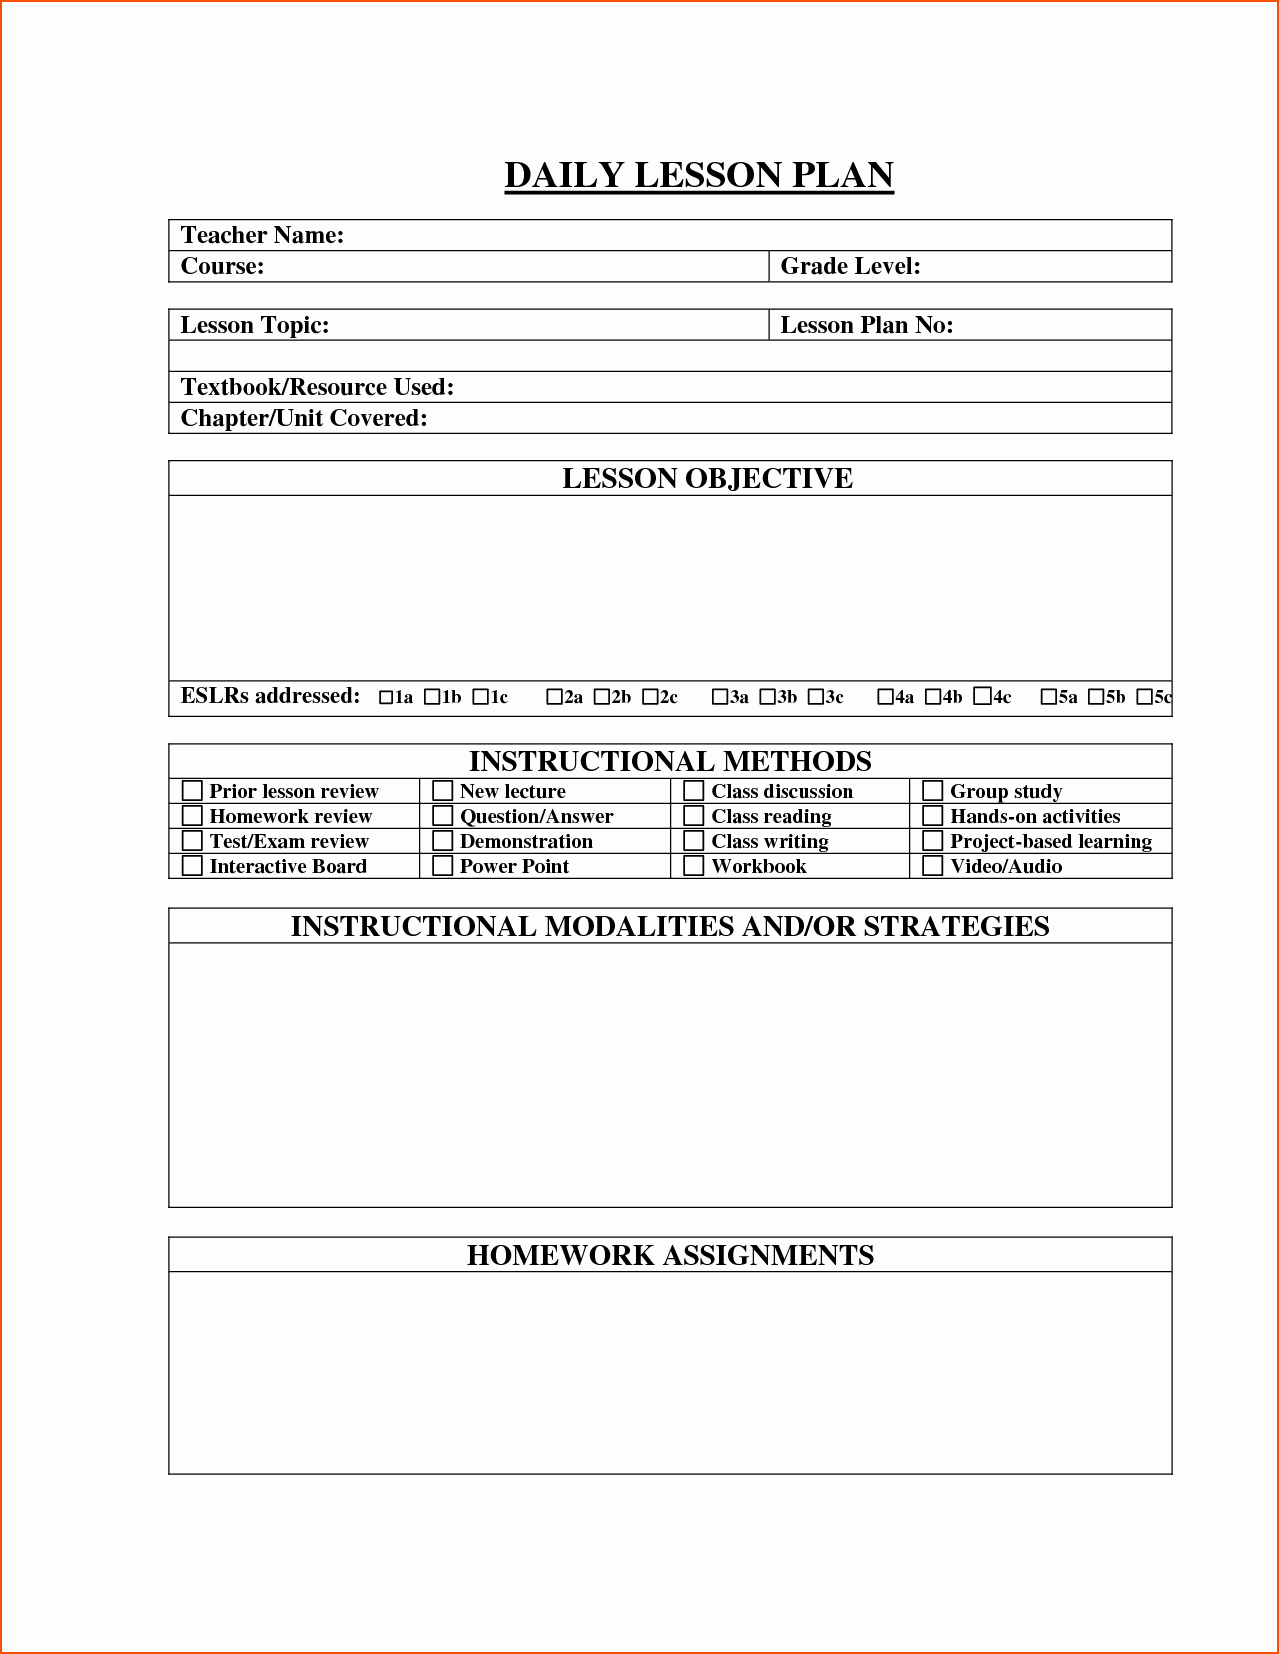 Sunday School Lesson Plan Template Best Of 6 Daily Lesson Plan Template Bookletemplate